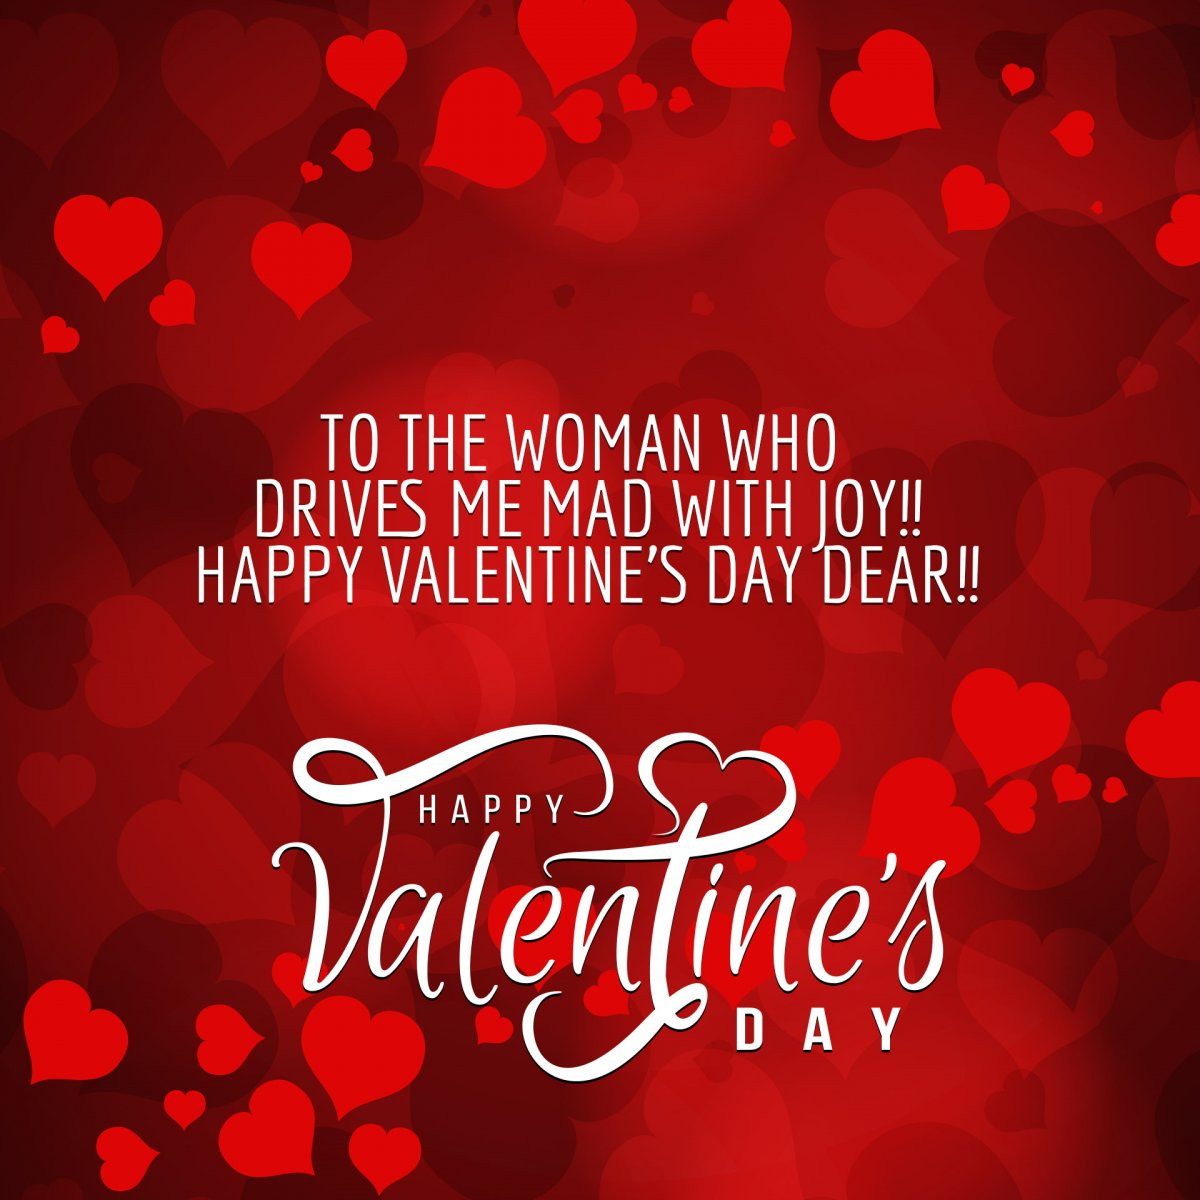 Valentines Day Quotes For Girlfriend
 Cute Happy Valentine’s Day 2019 Wishes Messages and Love